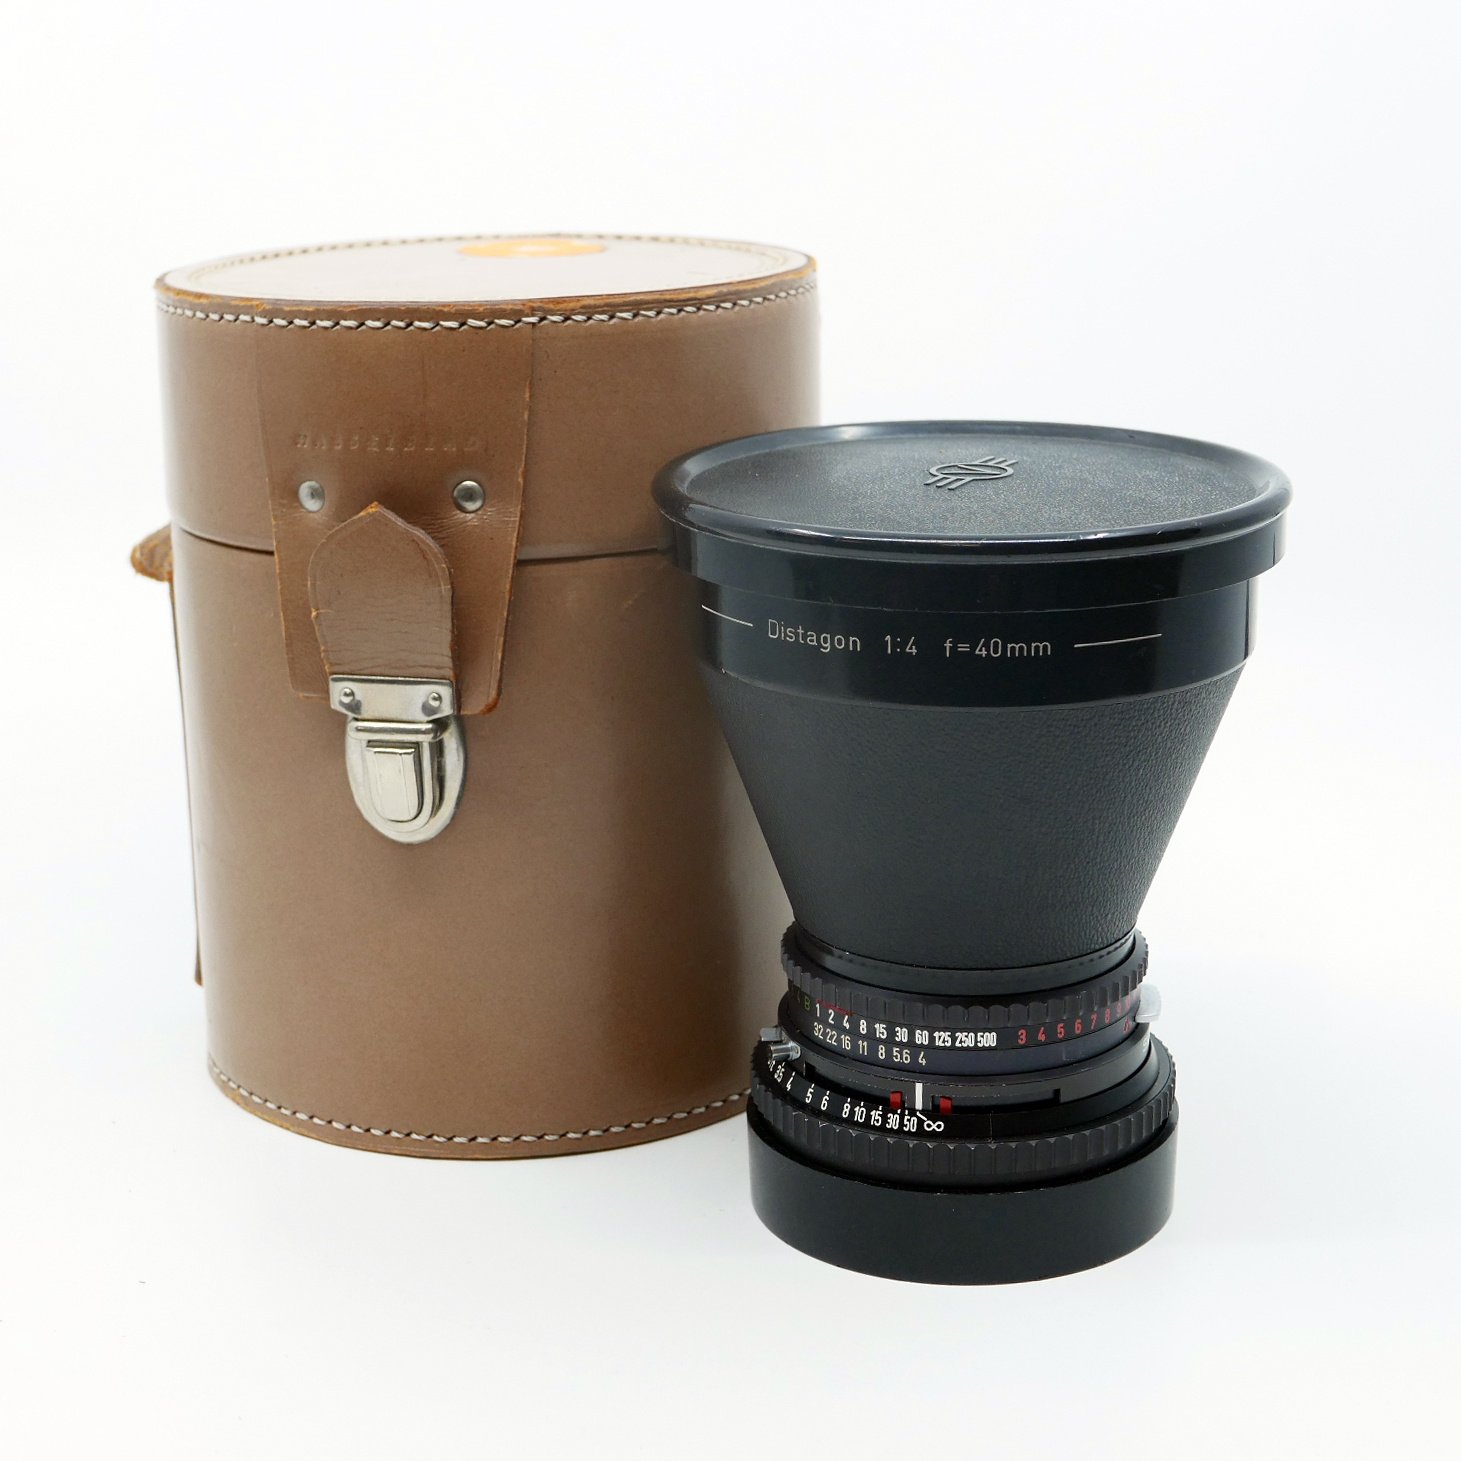 Hasselblad Zeiss Distagon 40mm f/4 (Used) - Pro Photo